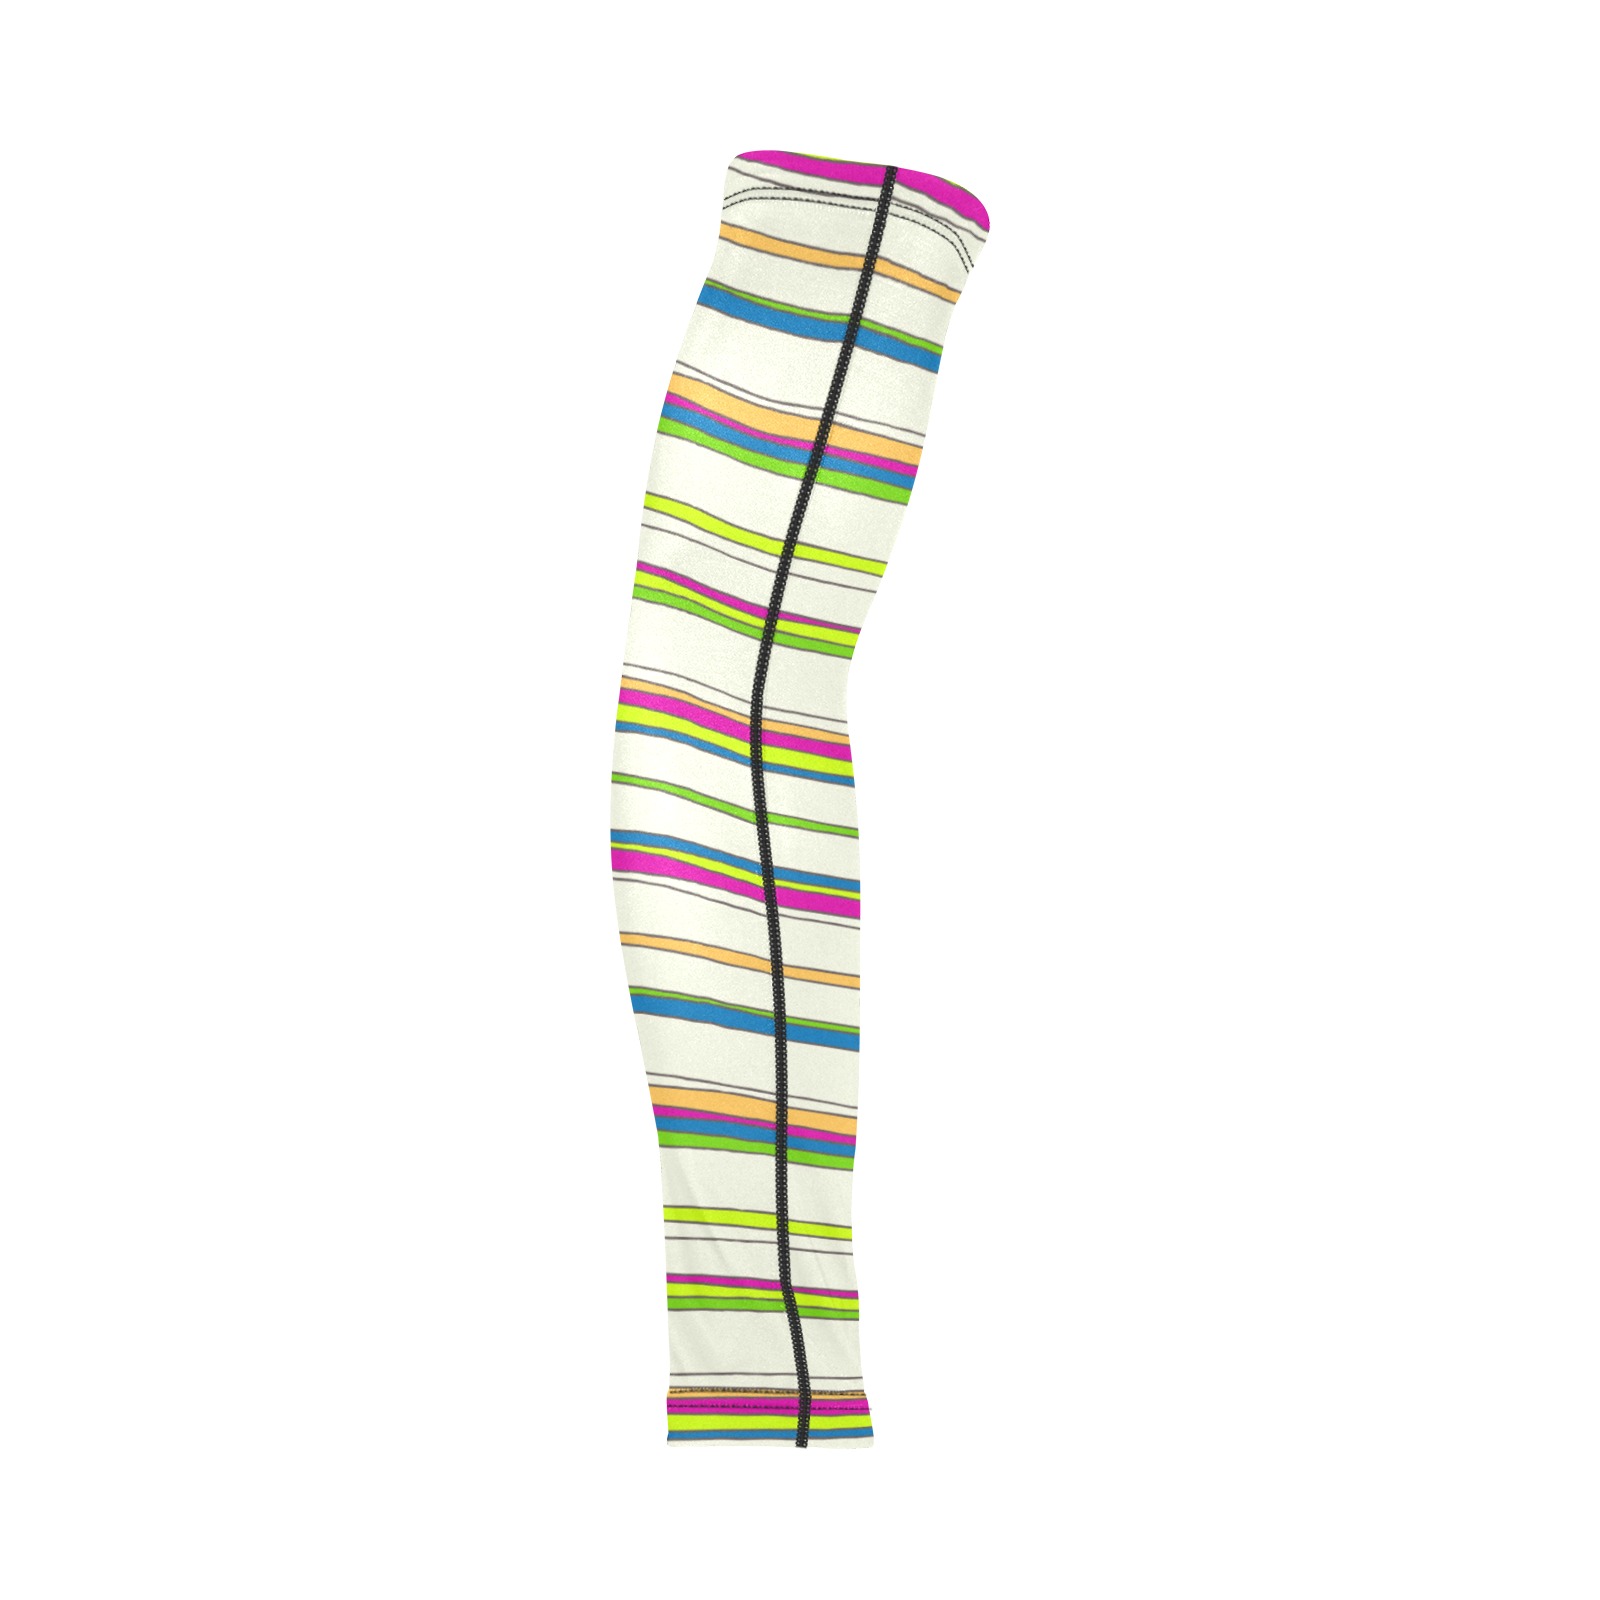 Colorful Odd Strokes Sketchnotes Pattern 01 Arm Sleeves (Set of Two)